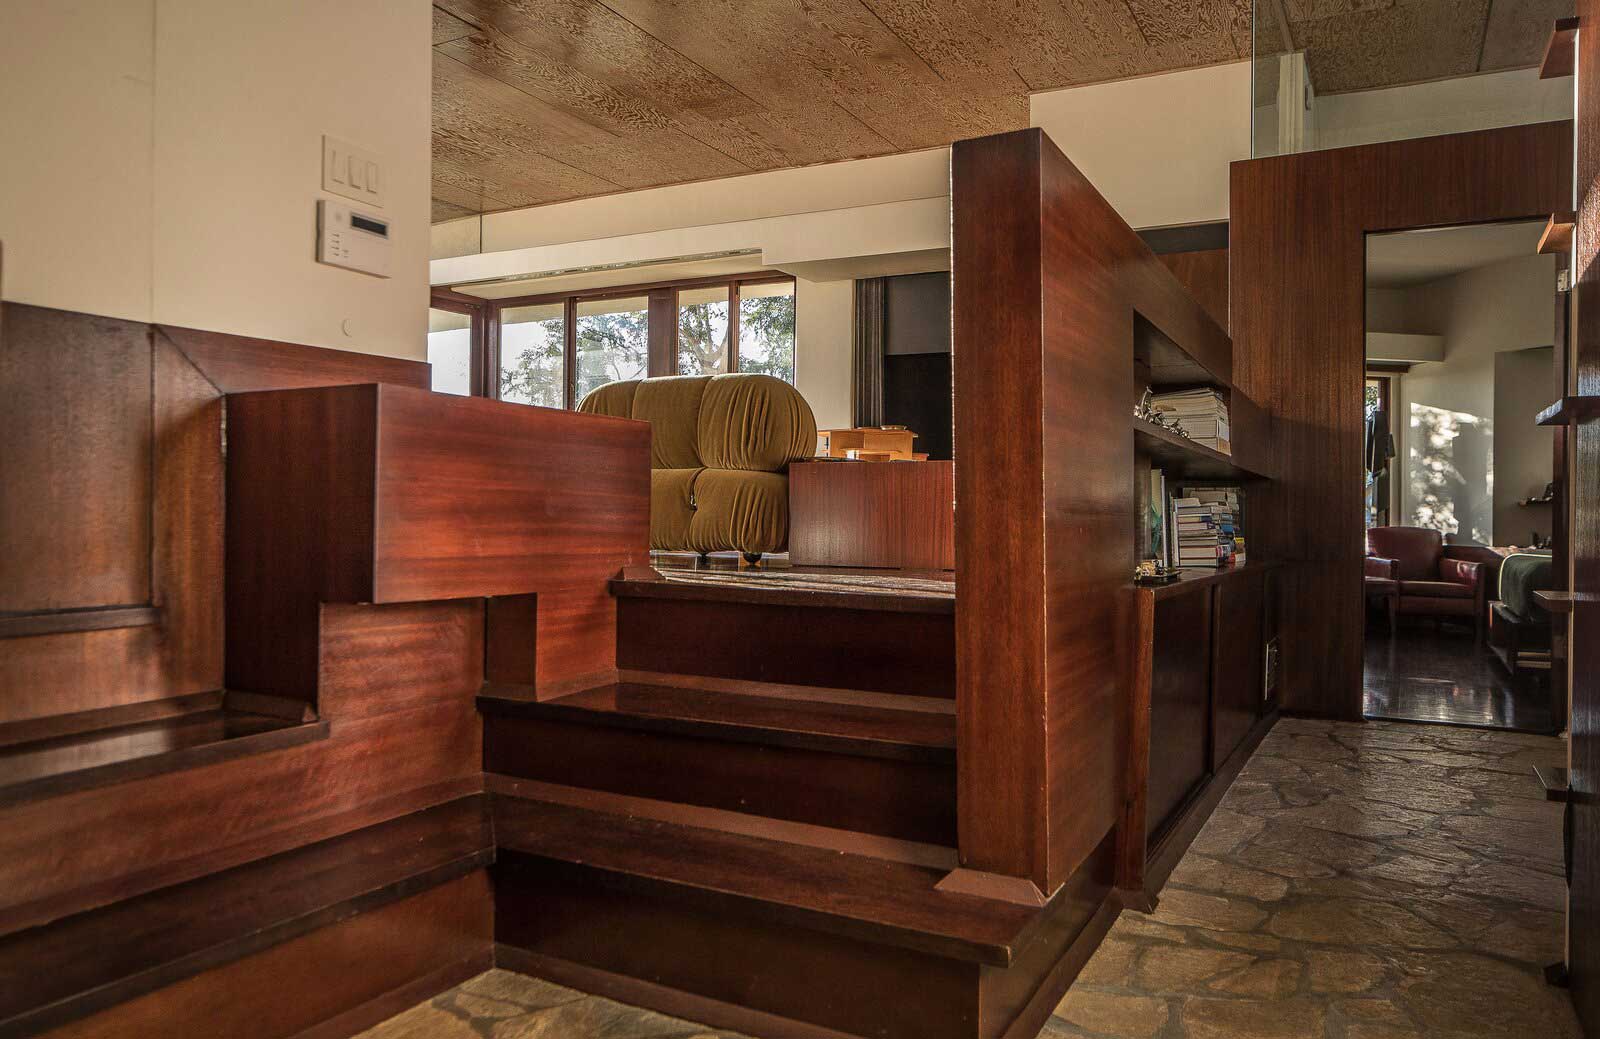 The penthouse apartment has original mahogany cabinetry and stairs, as well as period plywood ceilings